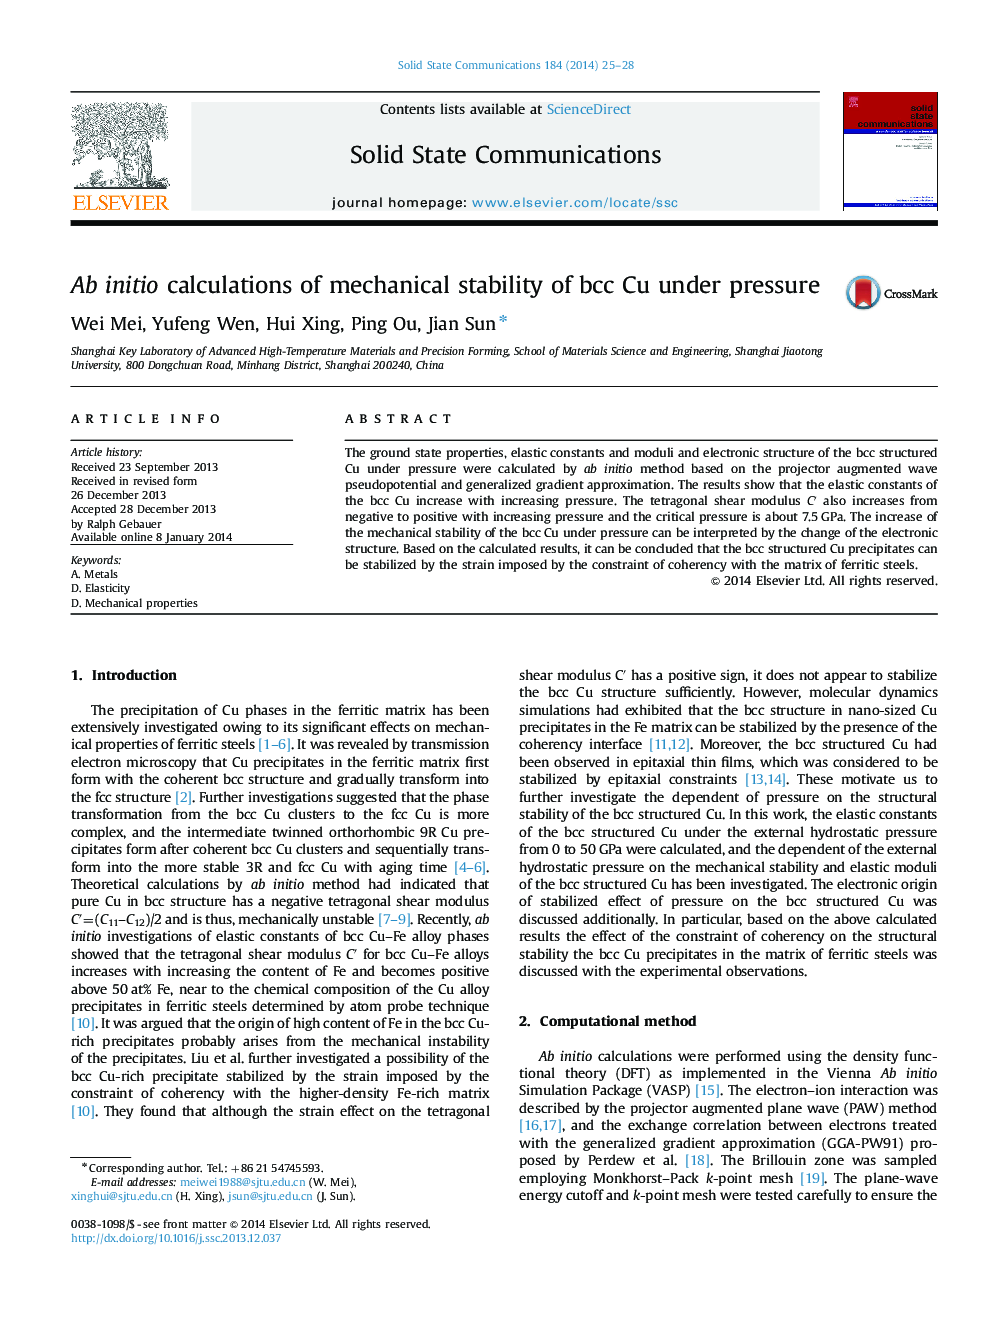 Ab initio calculations of mechanical stability of bcc Cu under pressure